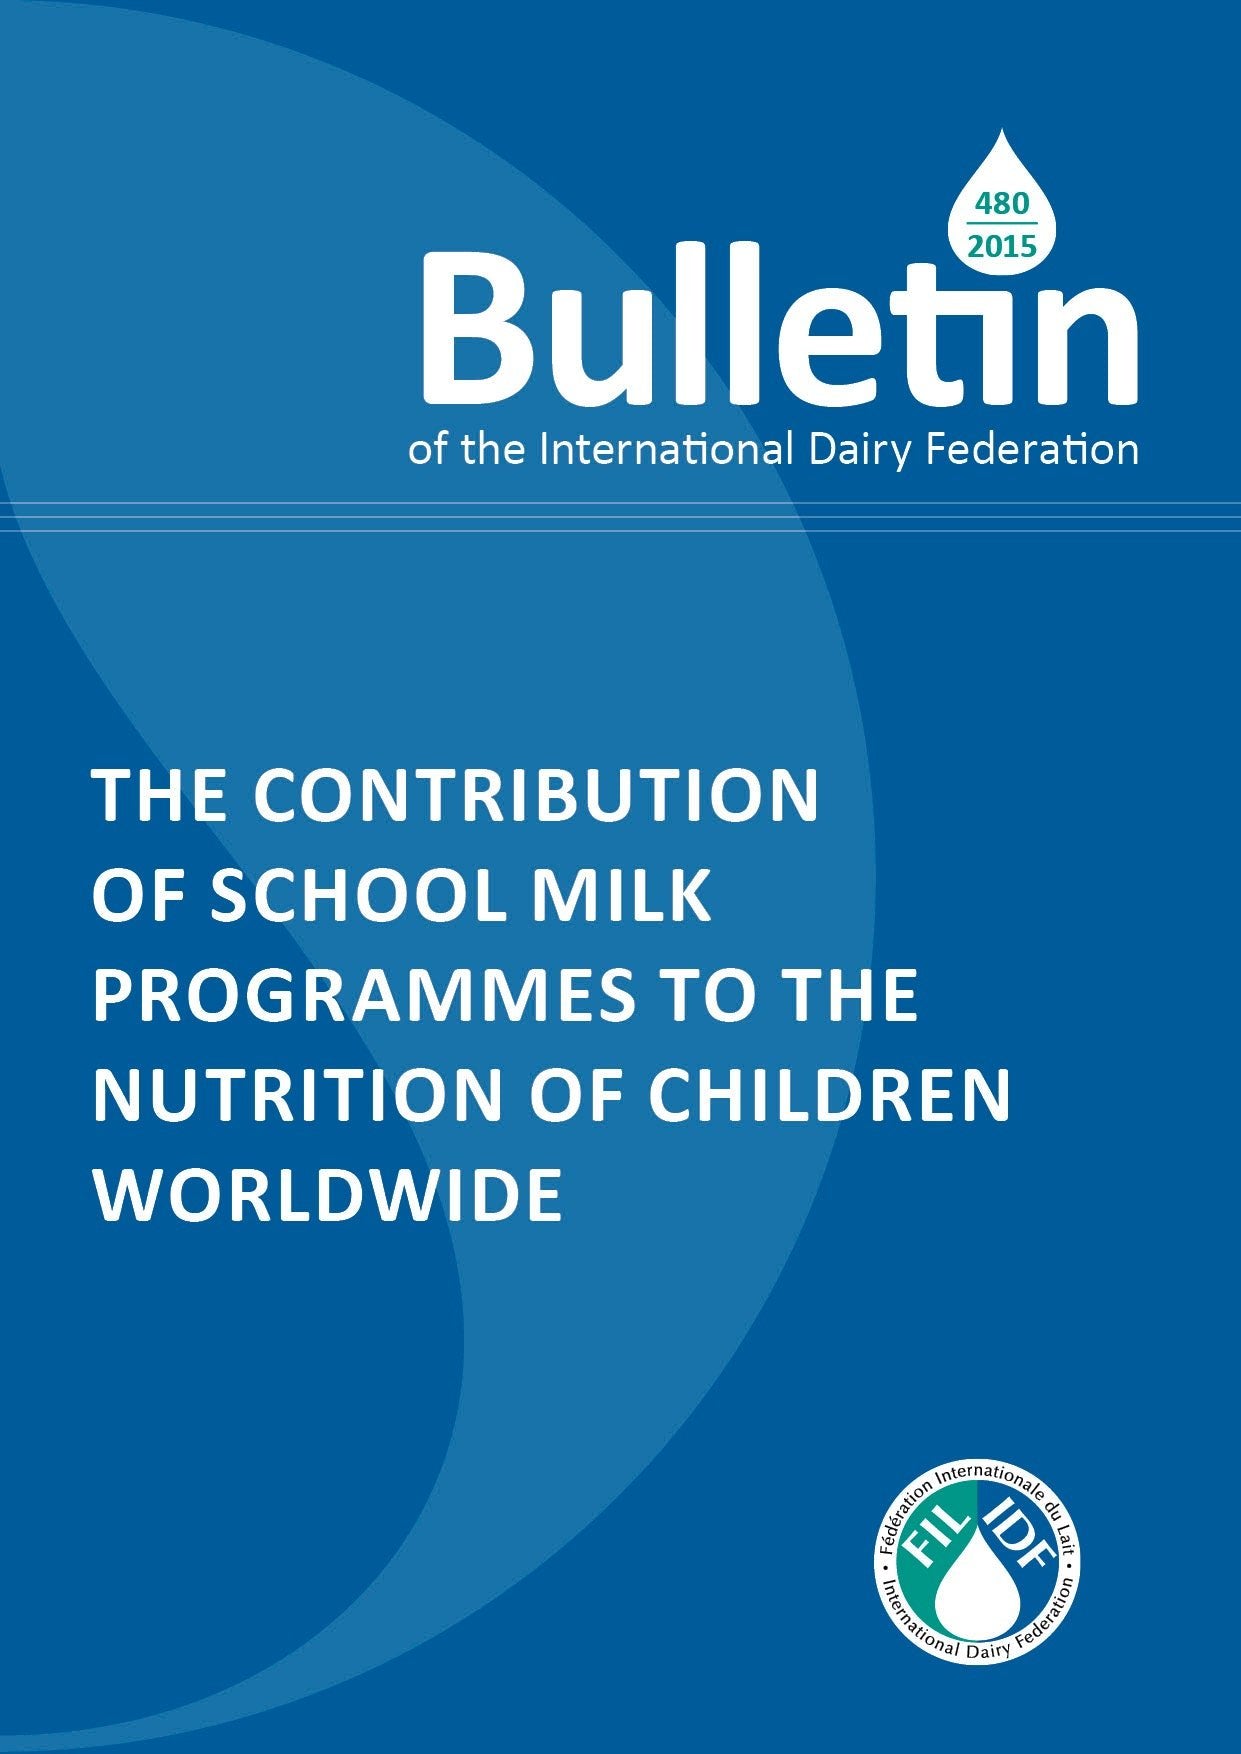 Bulletin of the IDF N° 480/ 2015: The contribution of school milk programmes to the nutrition of children worldwide - FIL-IDF